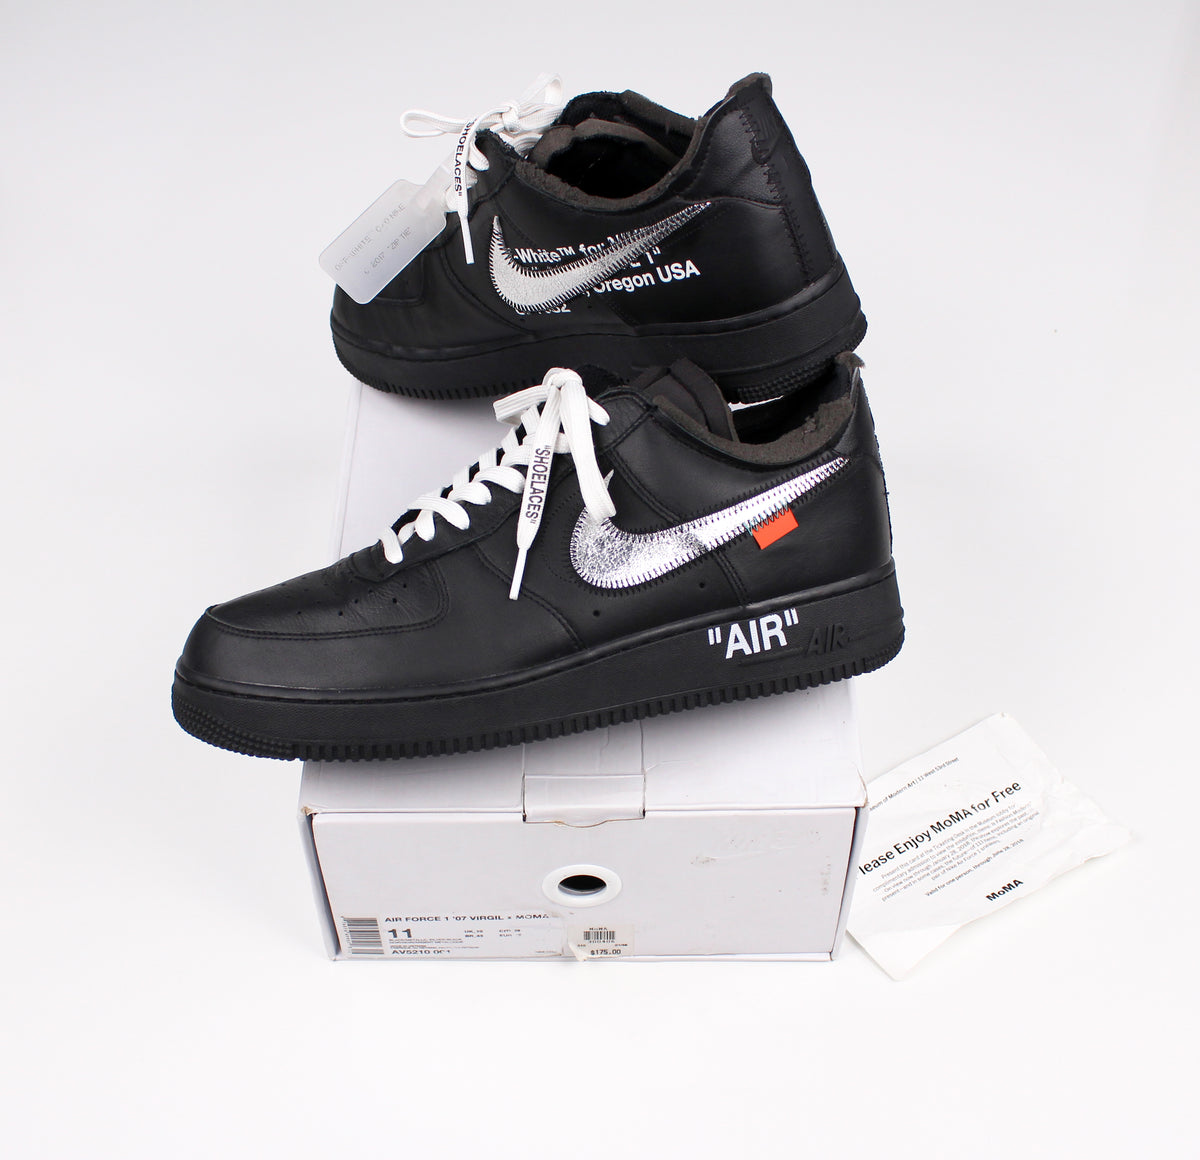 Nike Air Force 1 '07 Virgil Off White x Moma